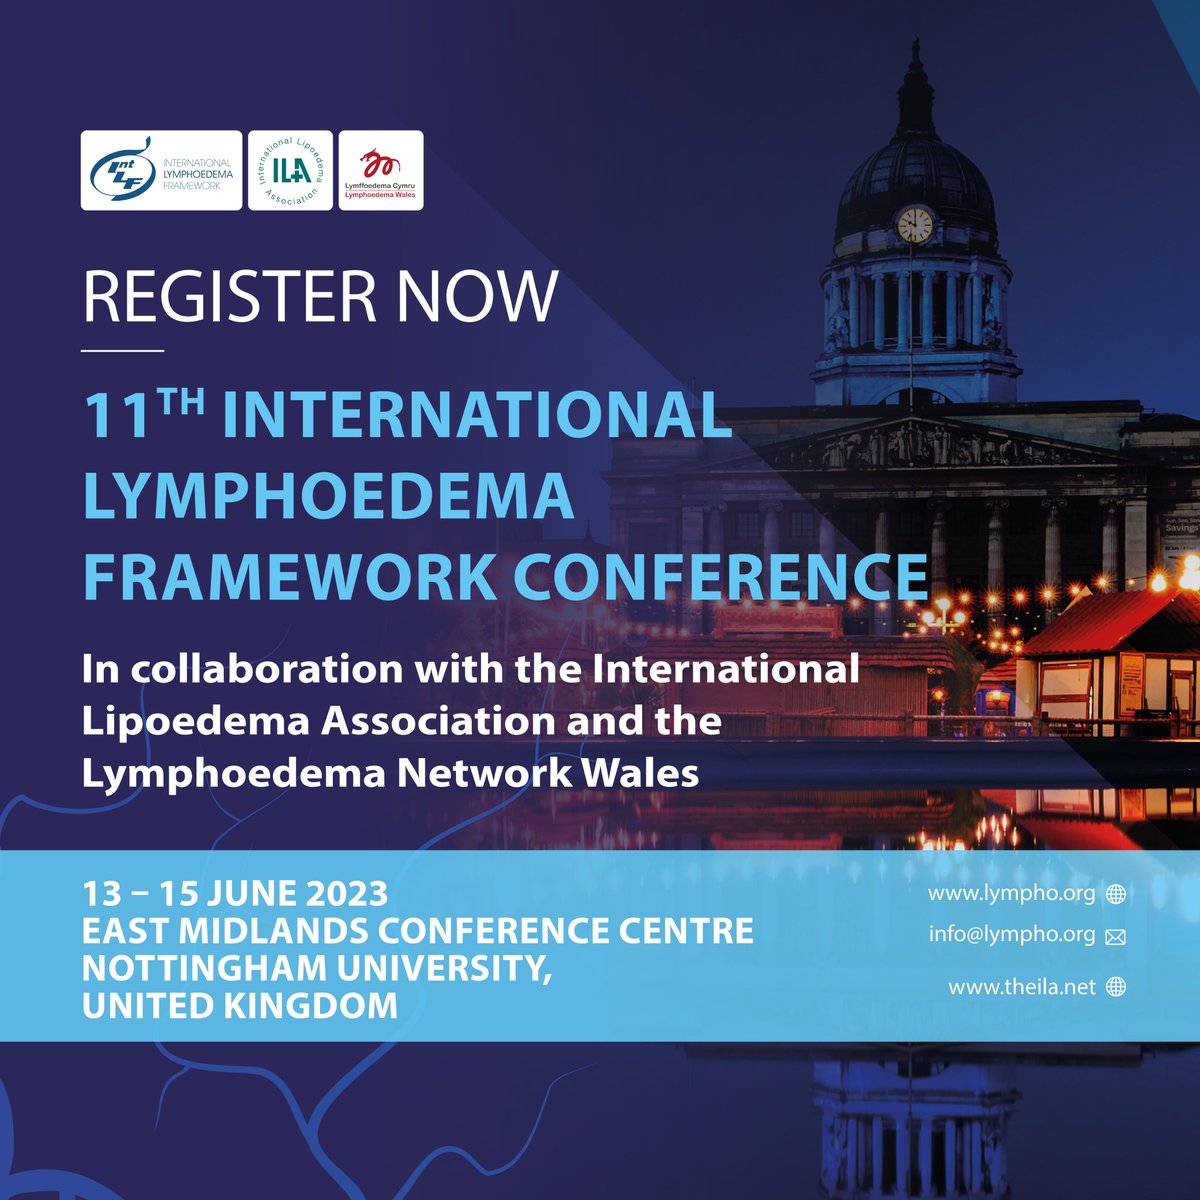 Registrations are now open for the 11th International Lymphoedema Framework conference #ILF2023 - join us in Nottingham (UK) 13-15 June 2023. To register and view the full scientific programme, visit: bit.ly/ilf2023reg